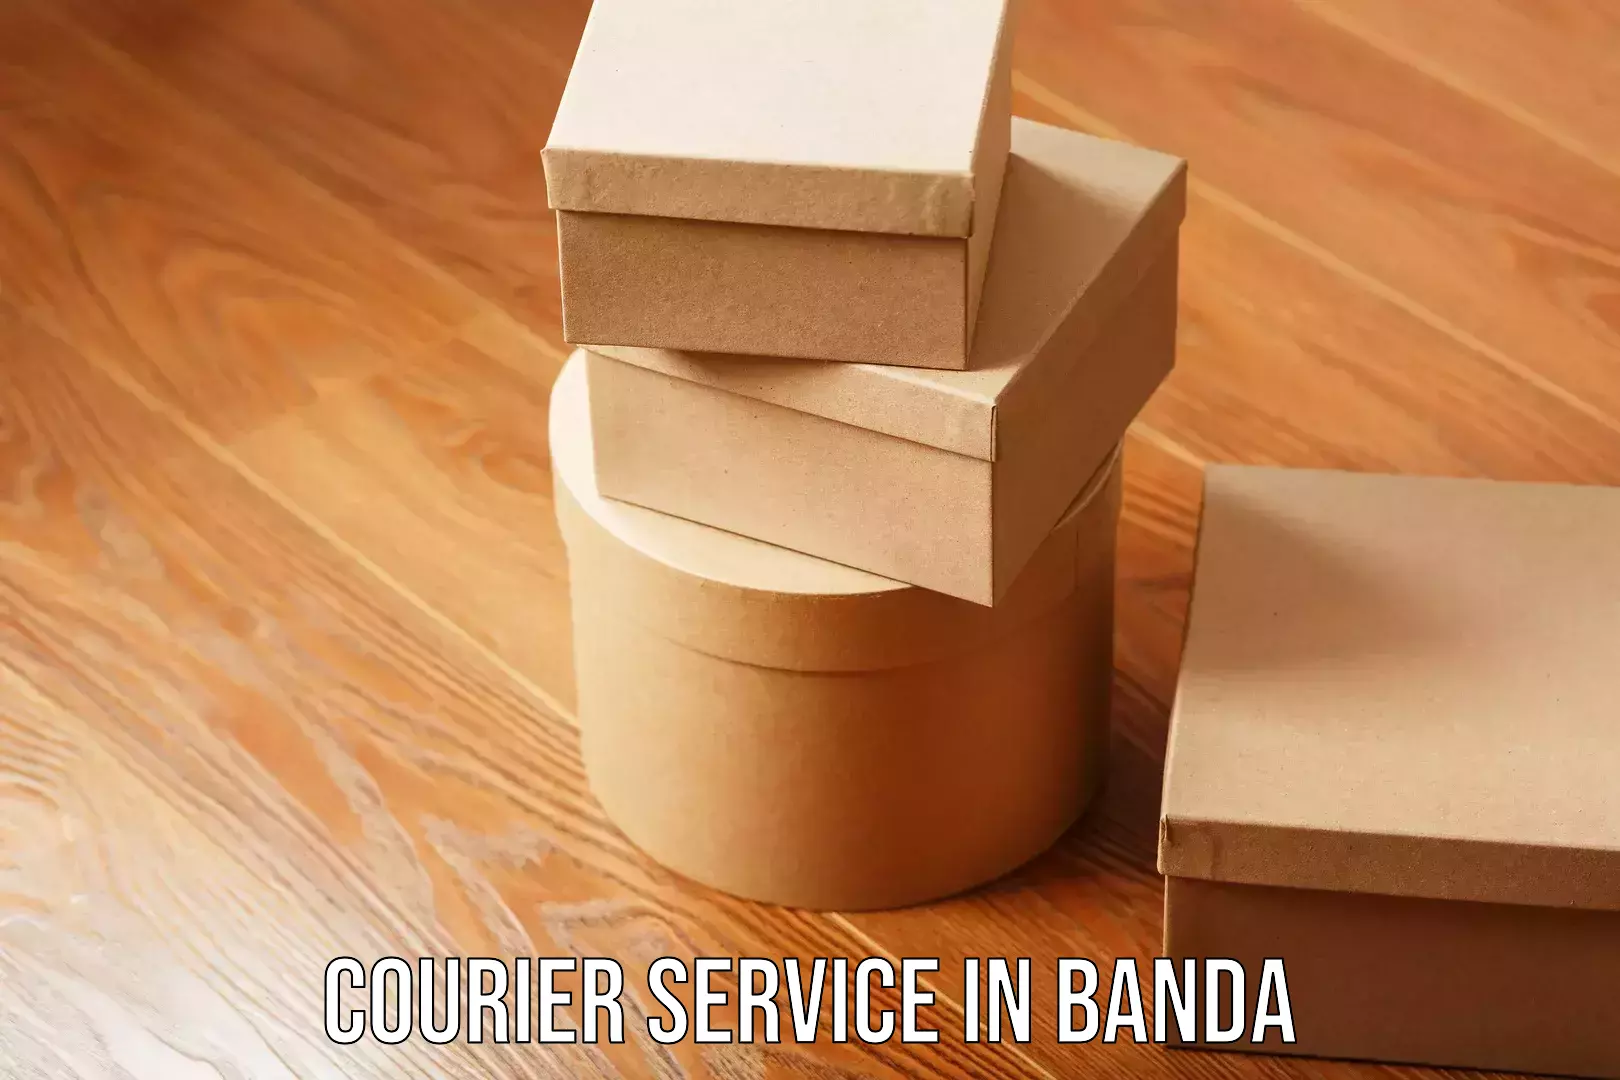 Expedited parcel delivery in Banda